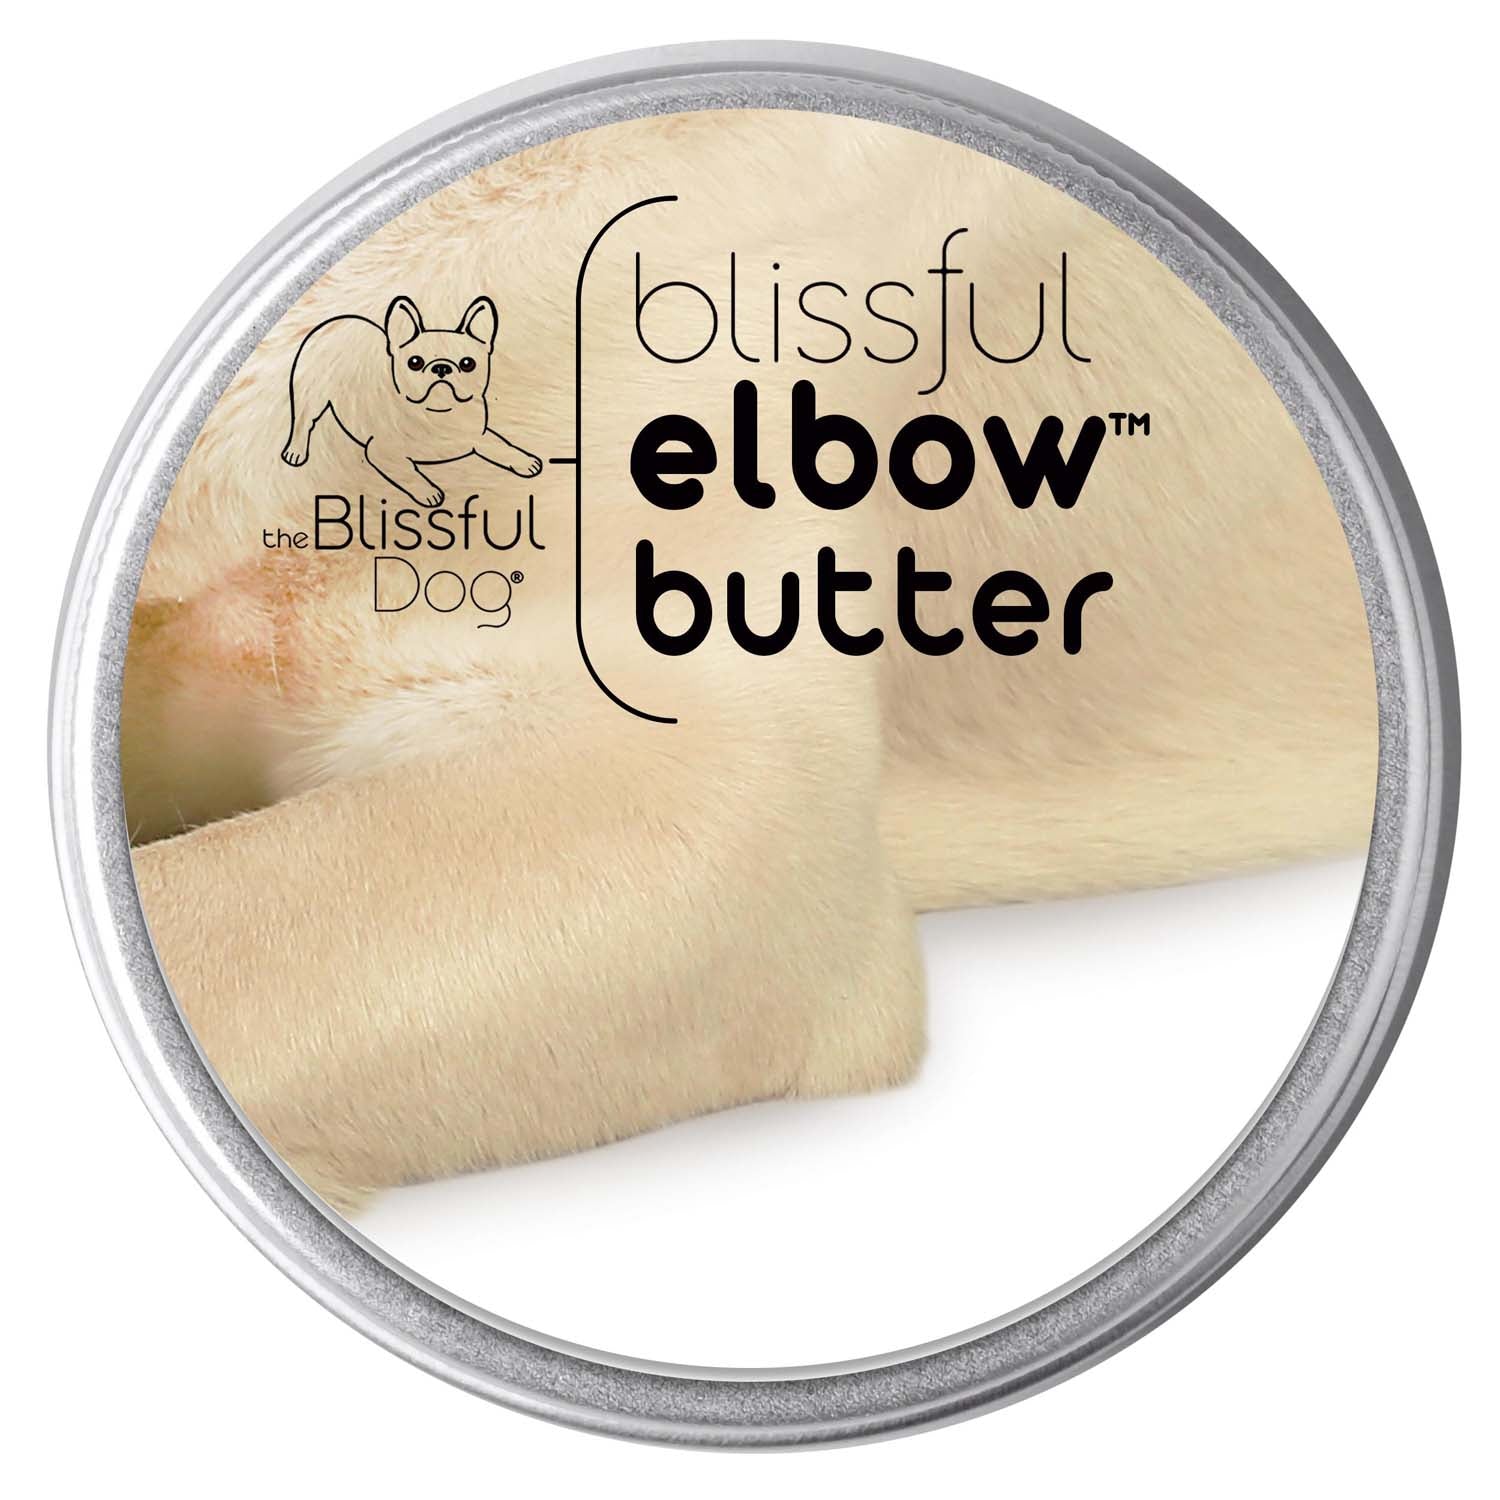 elbow butter for dog's calluses